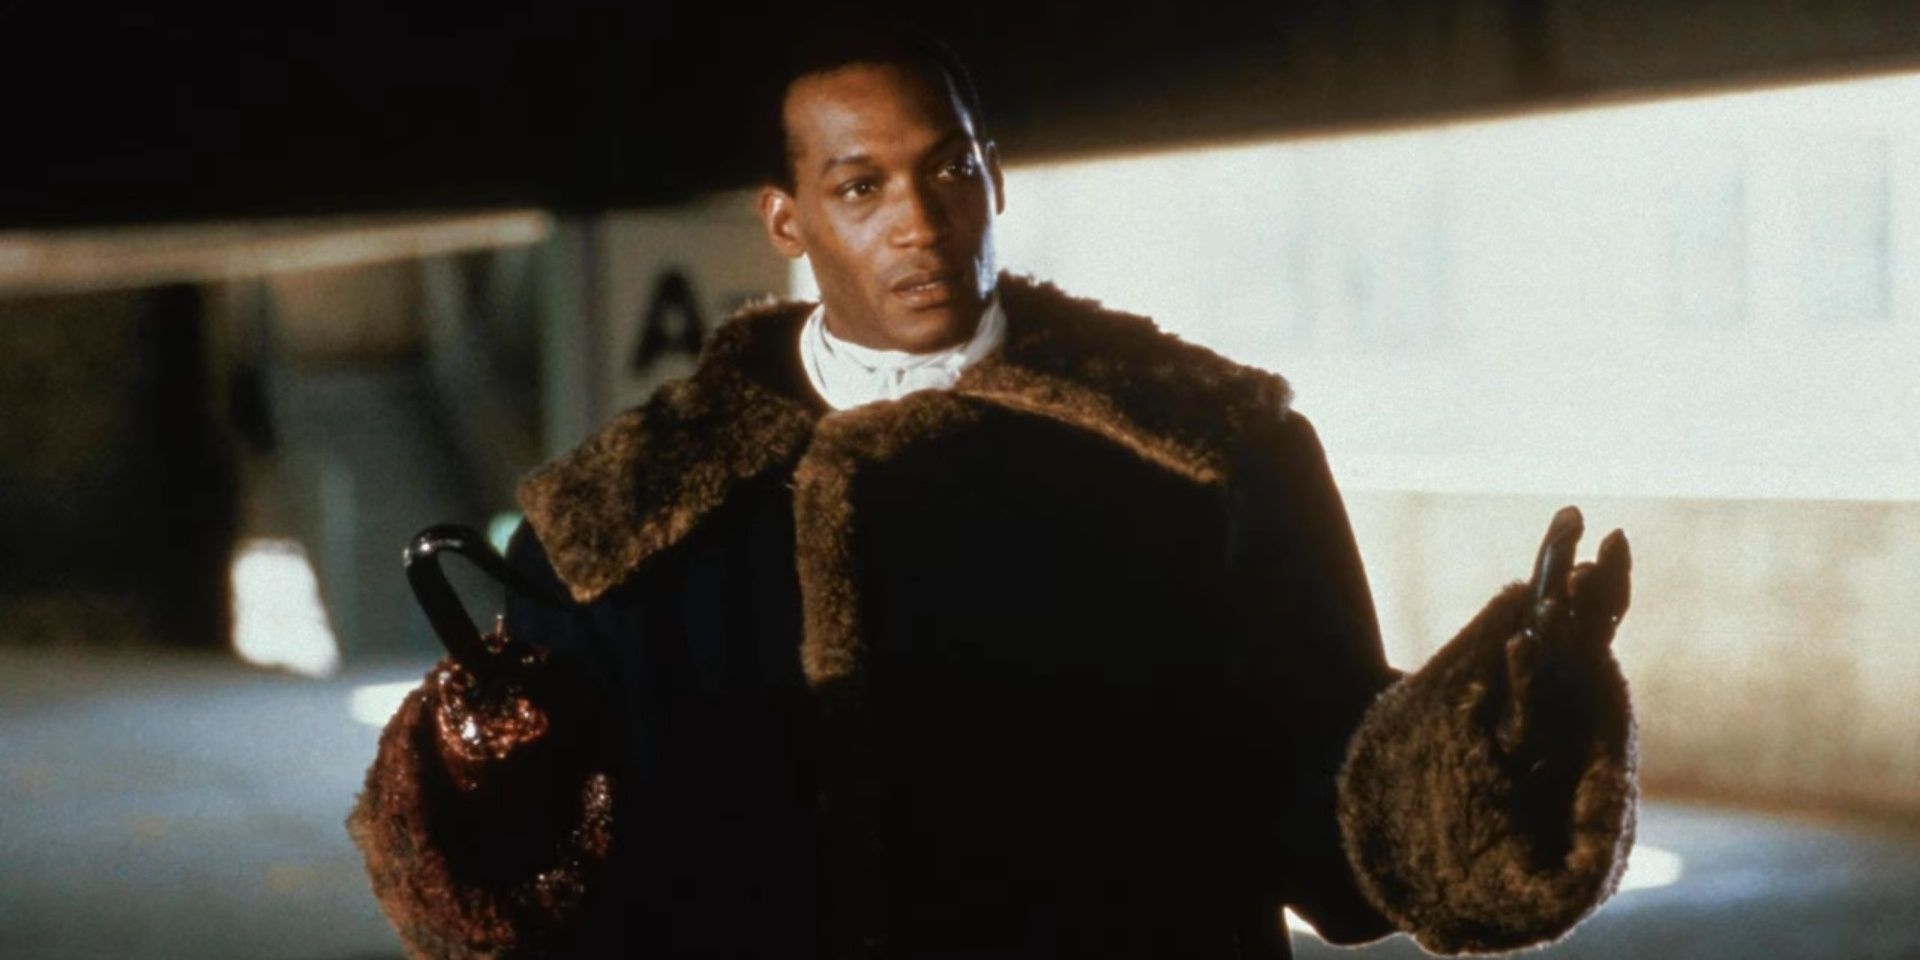 A man wears a fur coat and has a hook hand in Candyman 